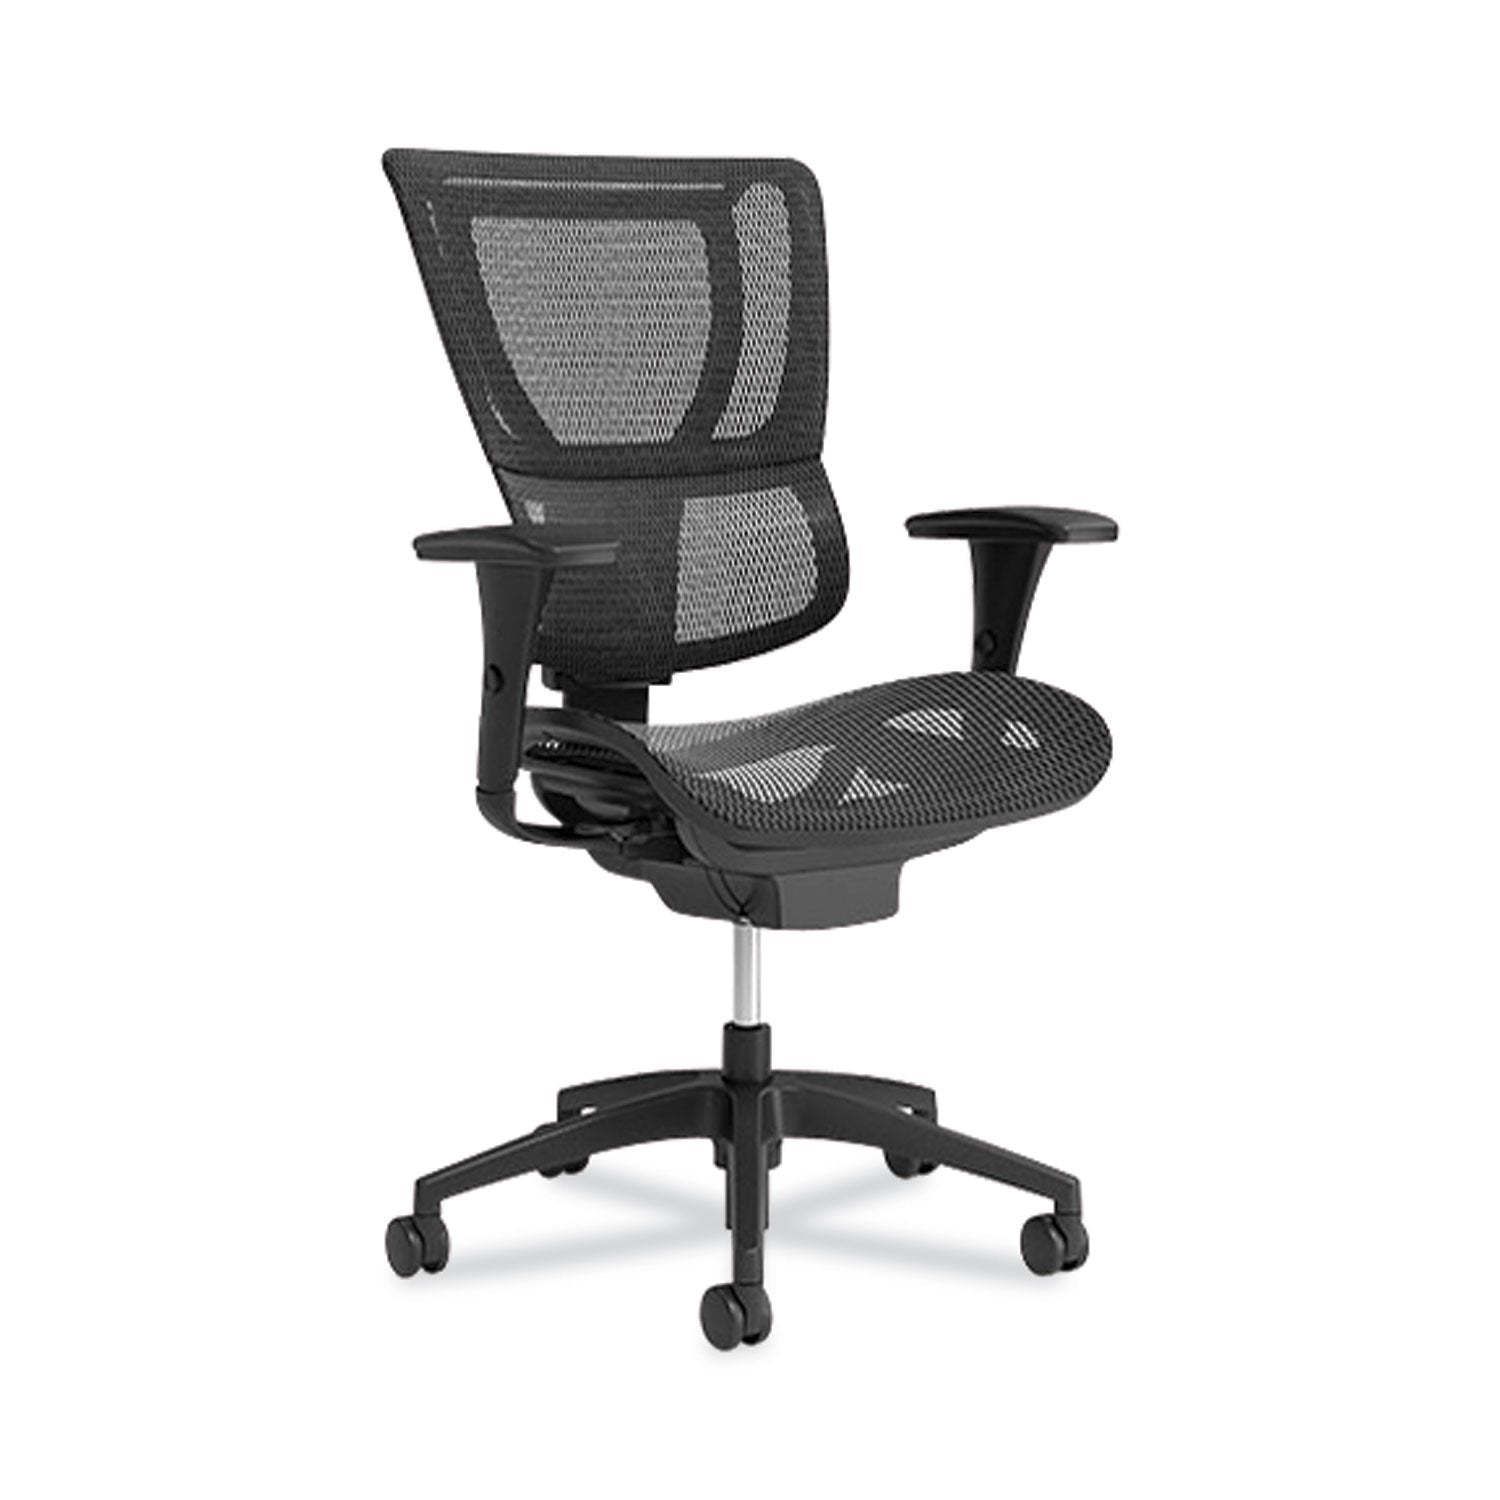 flexfit-1500tm-mesh-task-chair-suppports-up-to-300-lbs167-to-2026-seat-height-black-seat-black-back-black-base_uos28570cc - 1